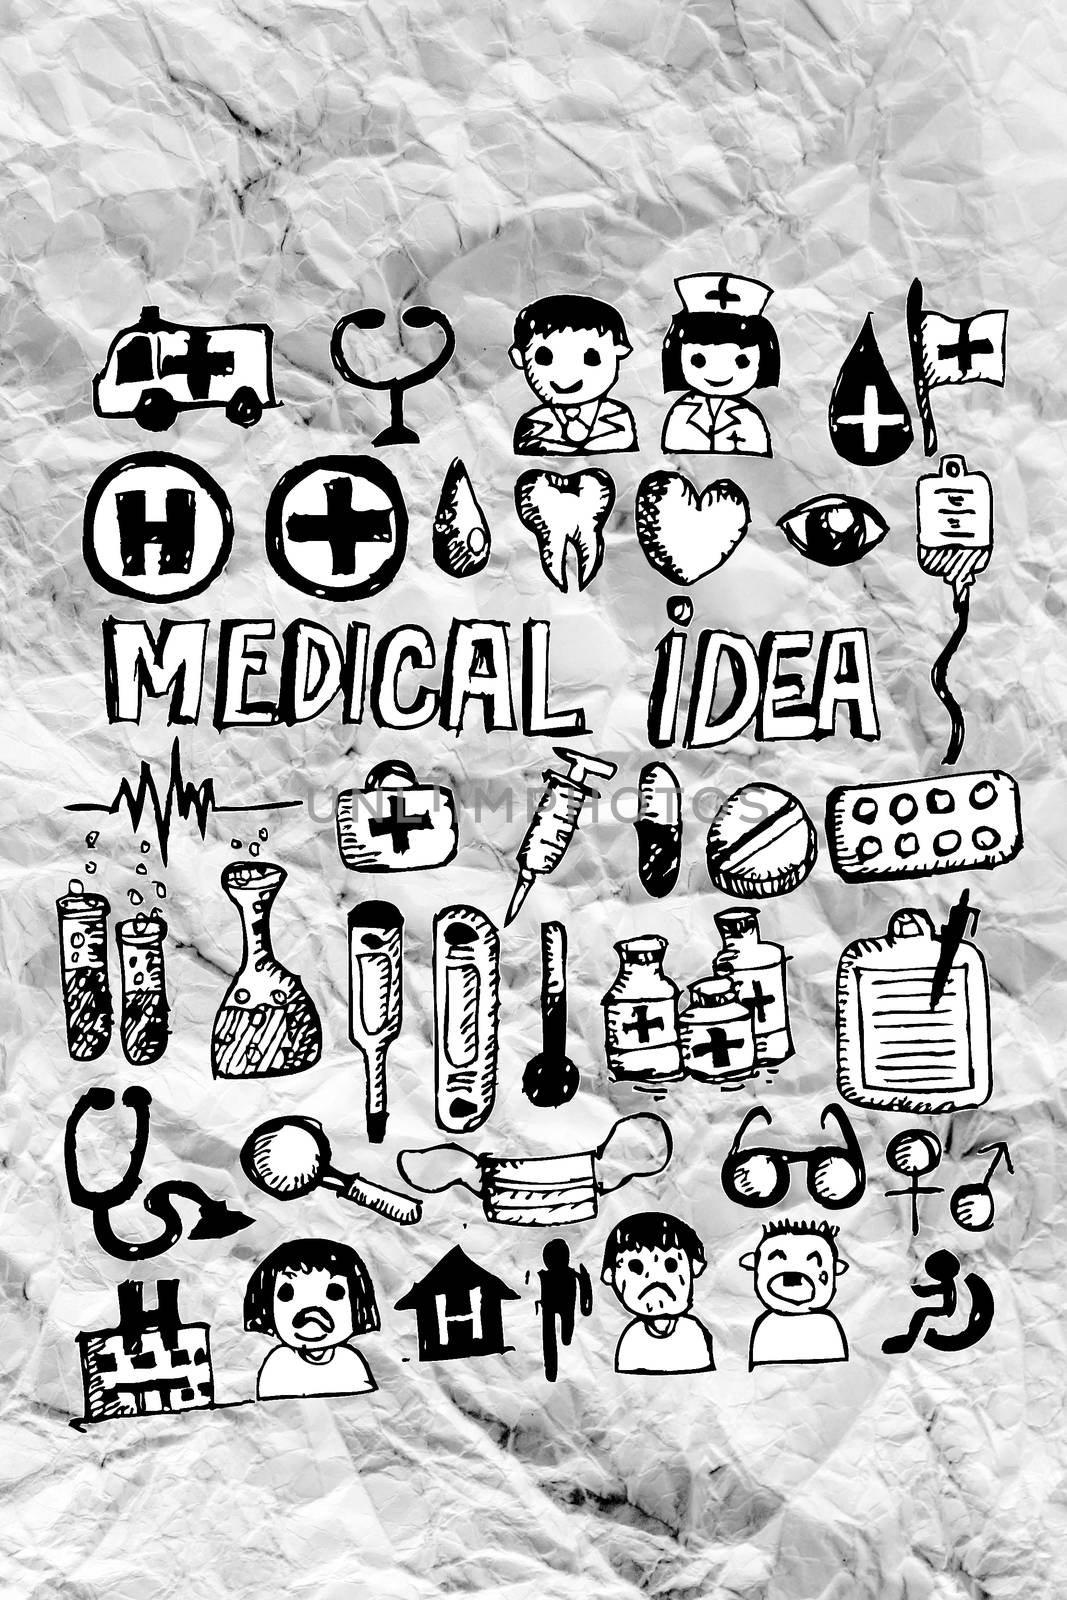 Medical icon set idea on crumpled paper by kiddaikiddee